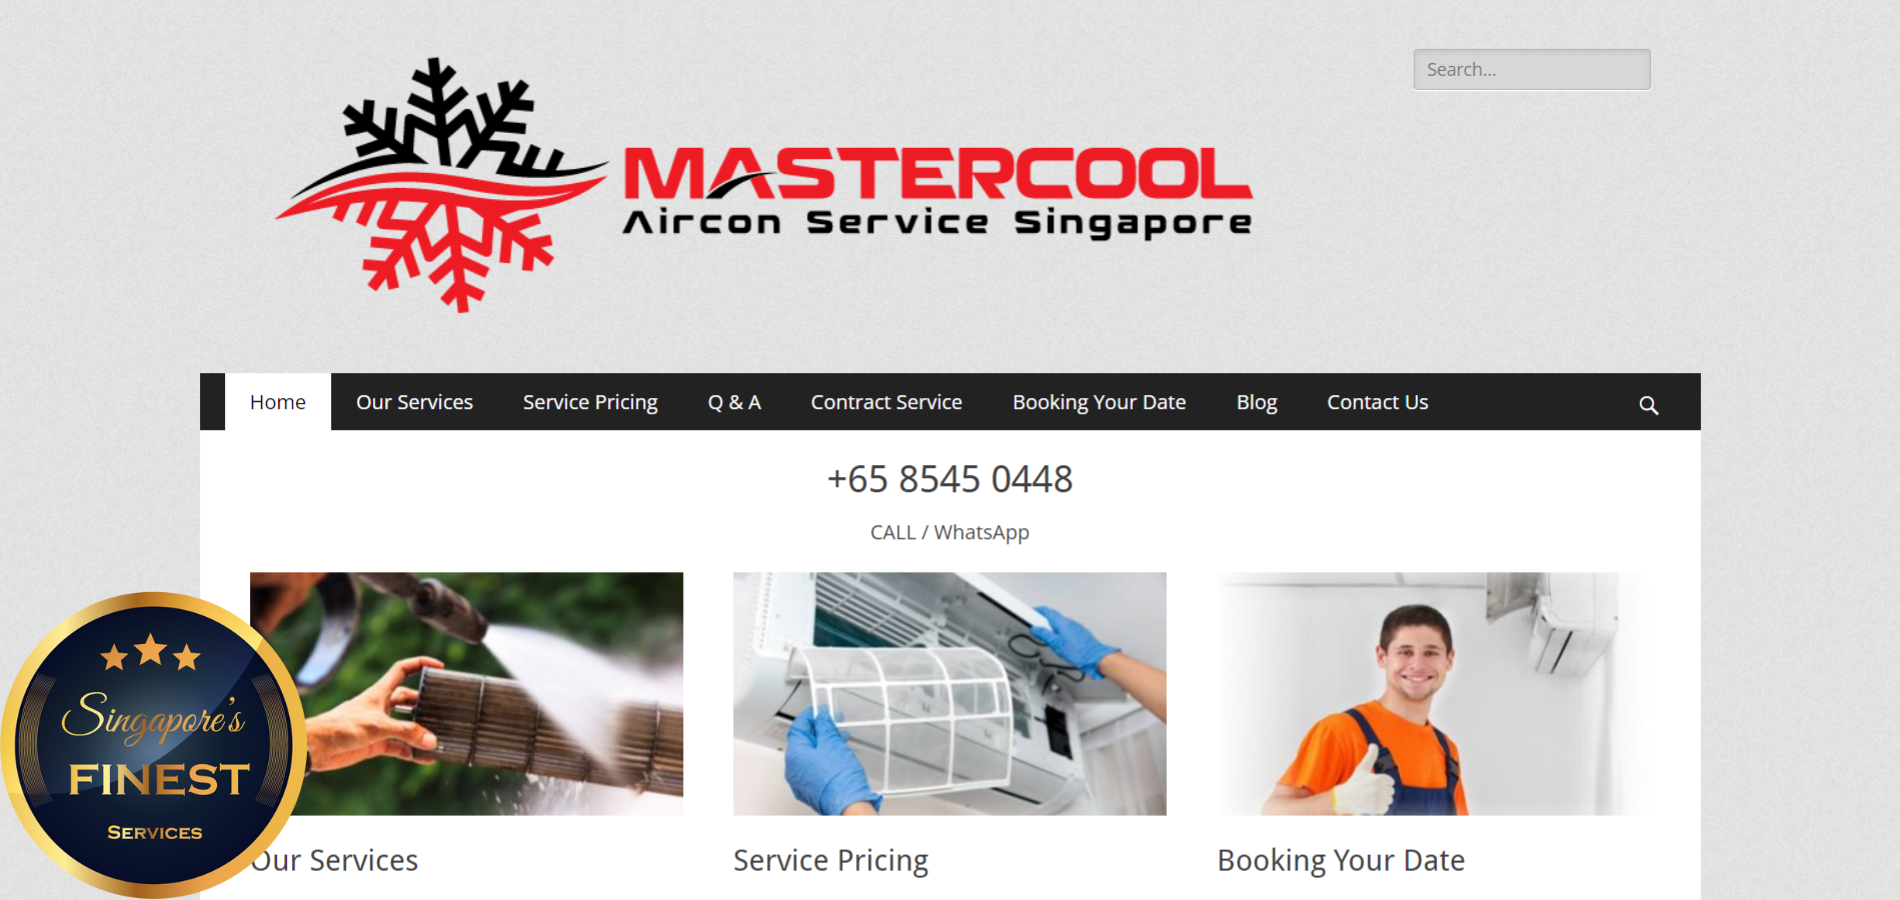 The Finest Aircon Servicing Companies in Singapore